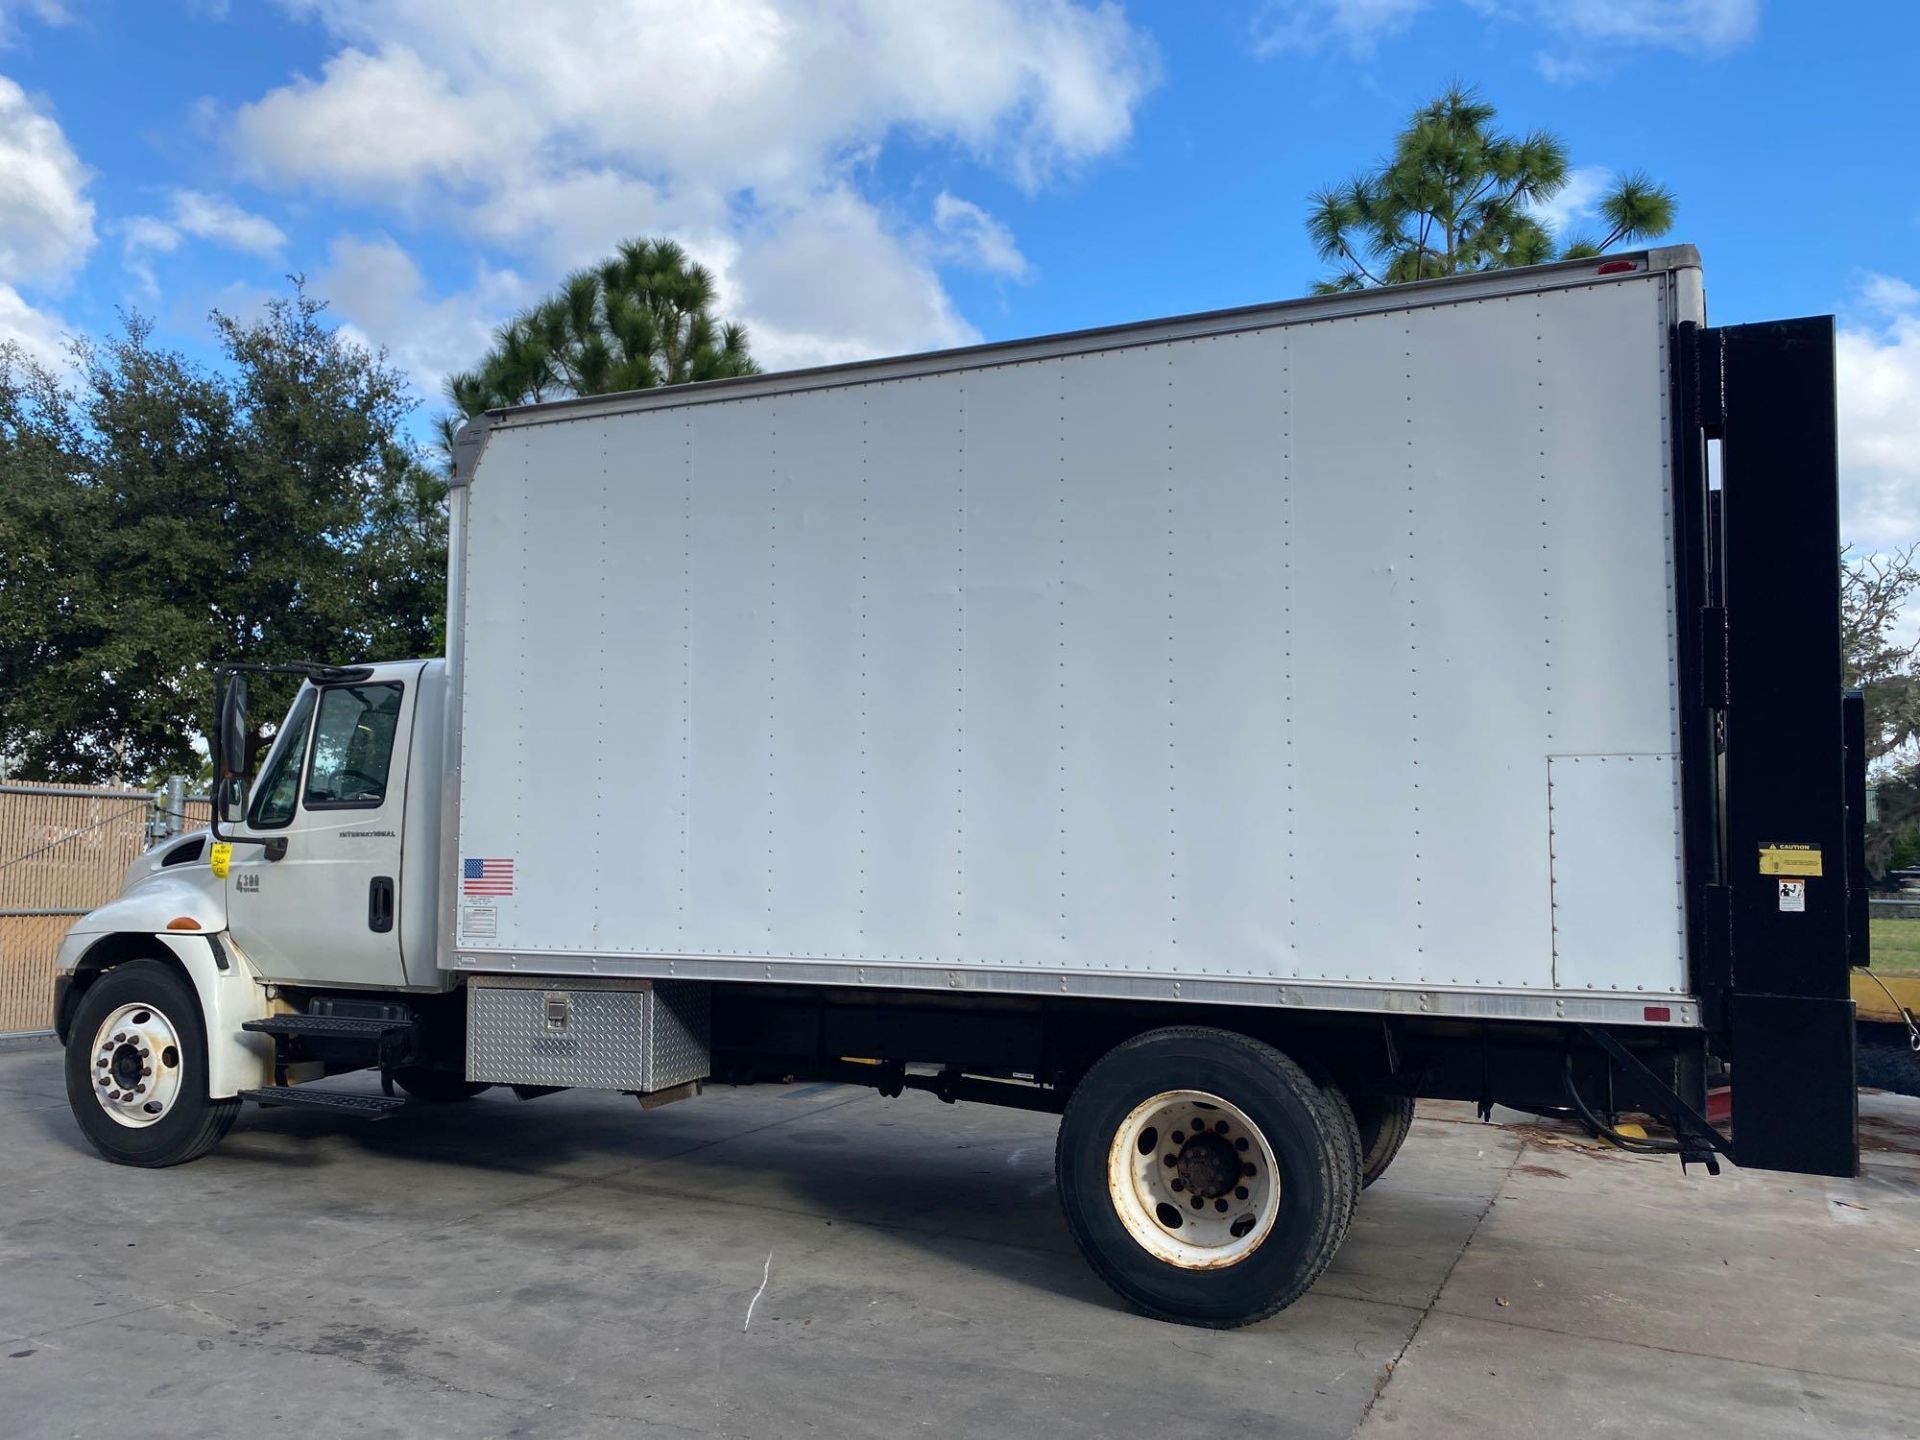 IH4300 BOX TRUCK, 16' X 8' BED, 4,000 LB CAPACITY LIFT GATE, NEWER ROLL UP BACK DOOR - Image 8 of 24